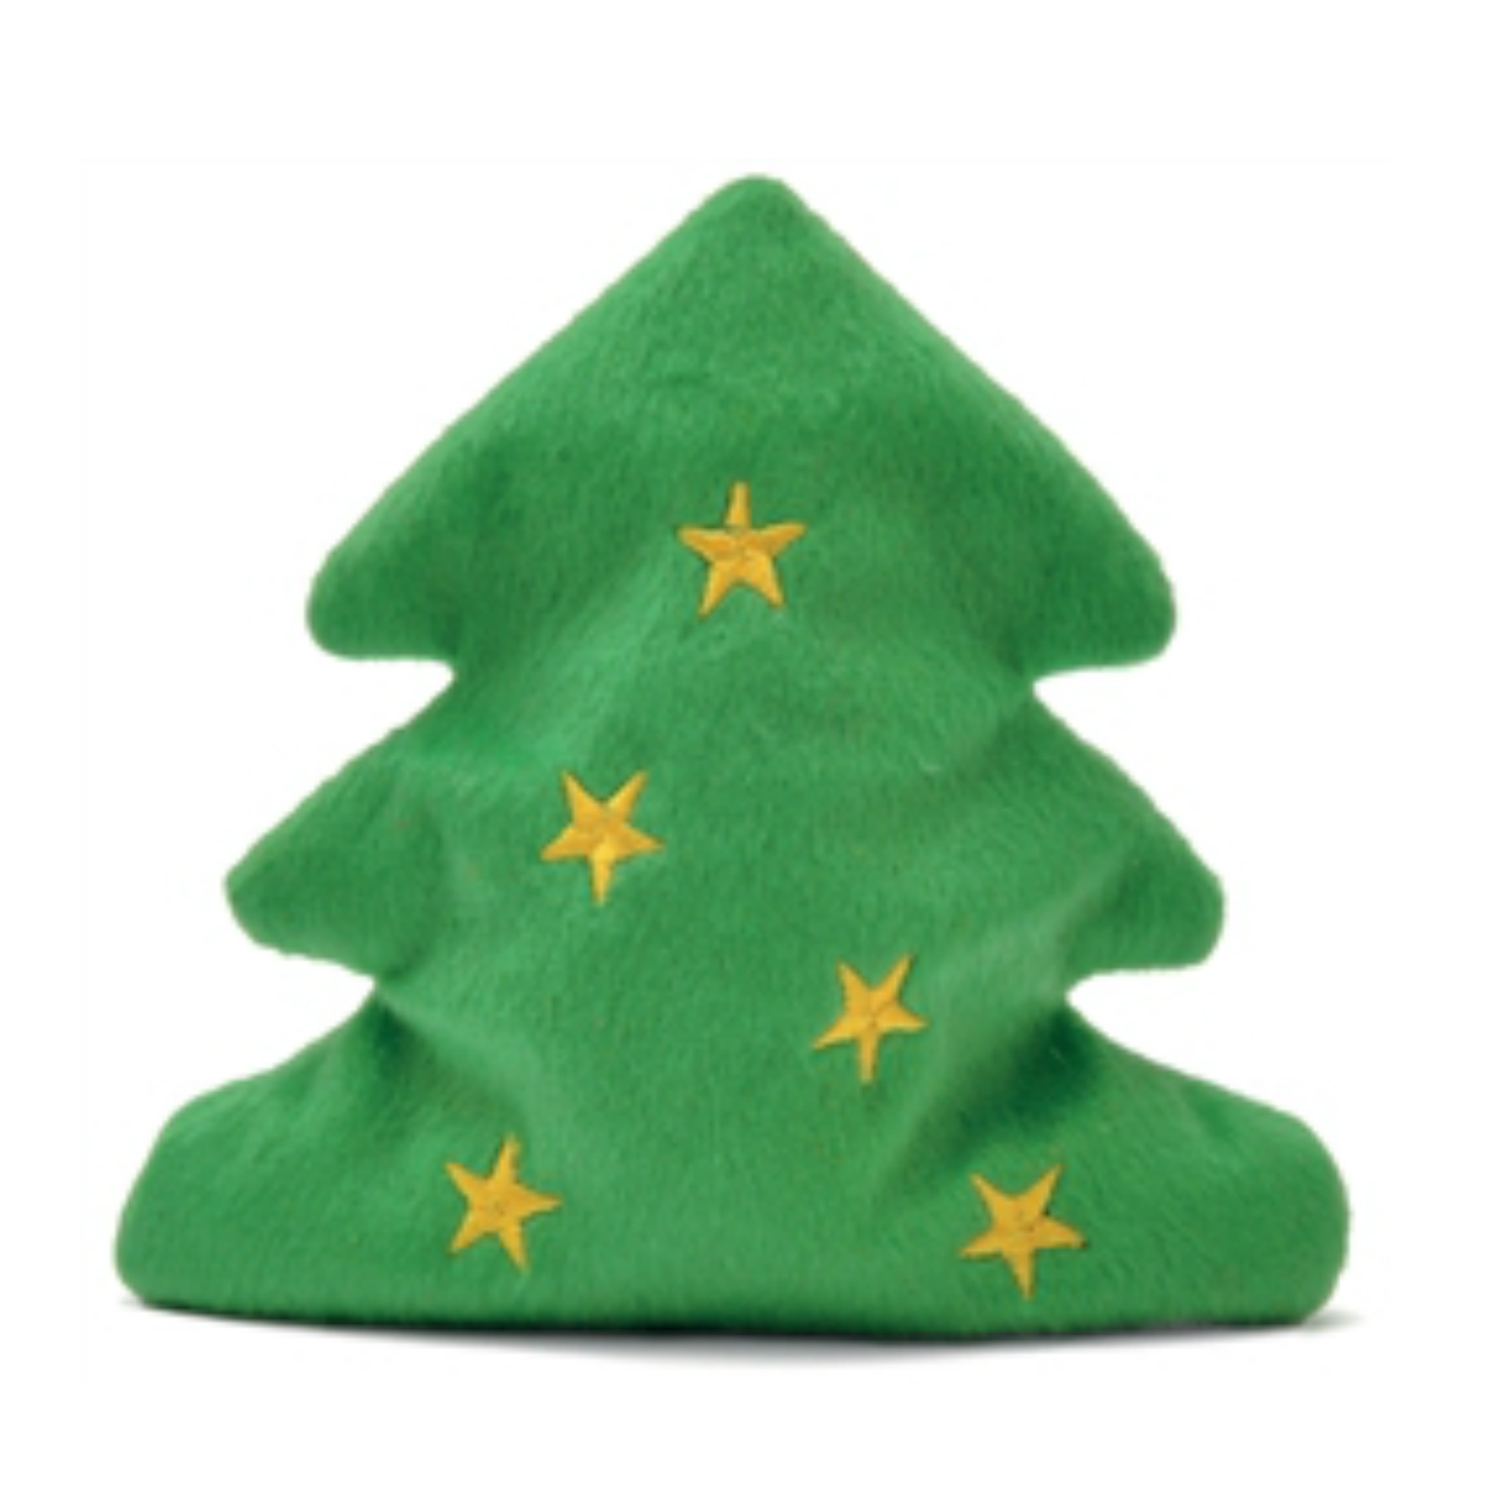 Bavarian Cat Toy - Christmas Tree with Same Day Shipping | BaxterBoo